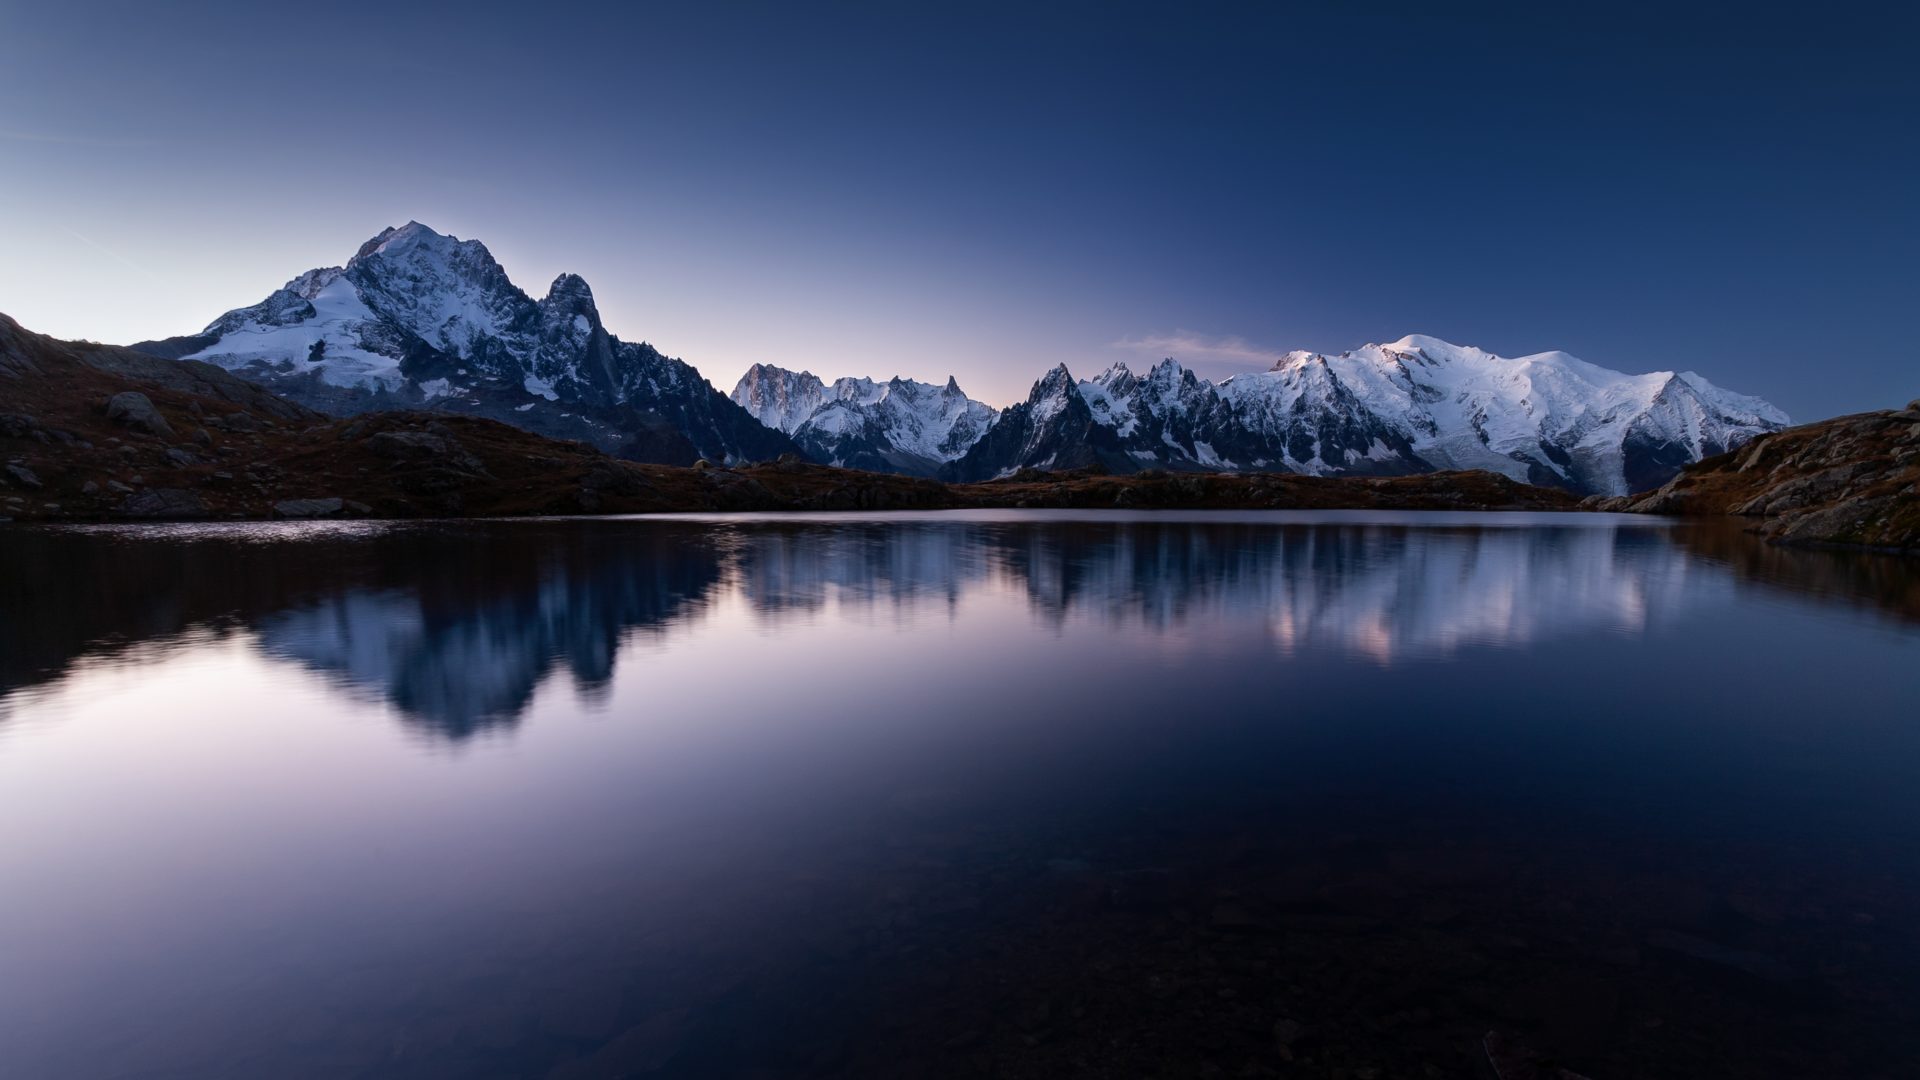 The mount Mont Blanc covered in the snow reflecting on the water in the evening in Chamonix, France